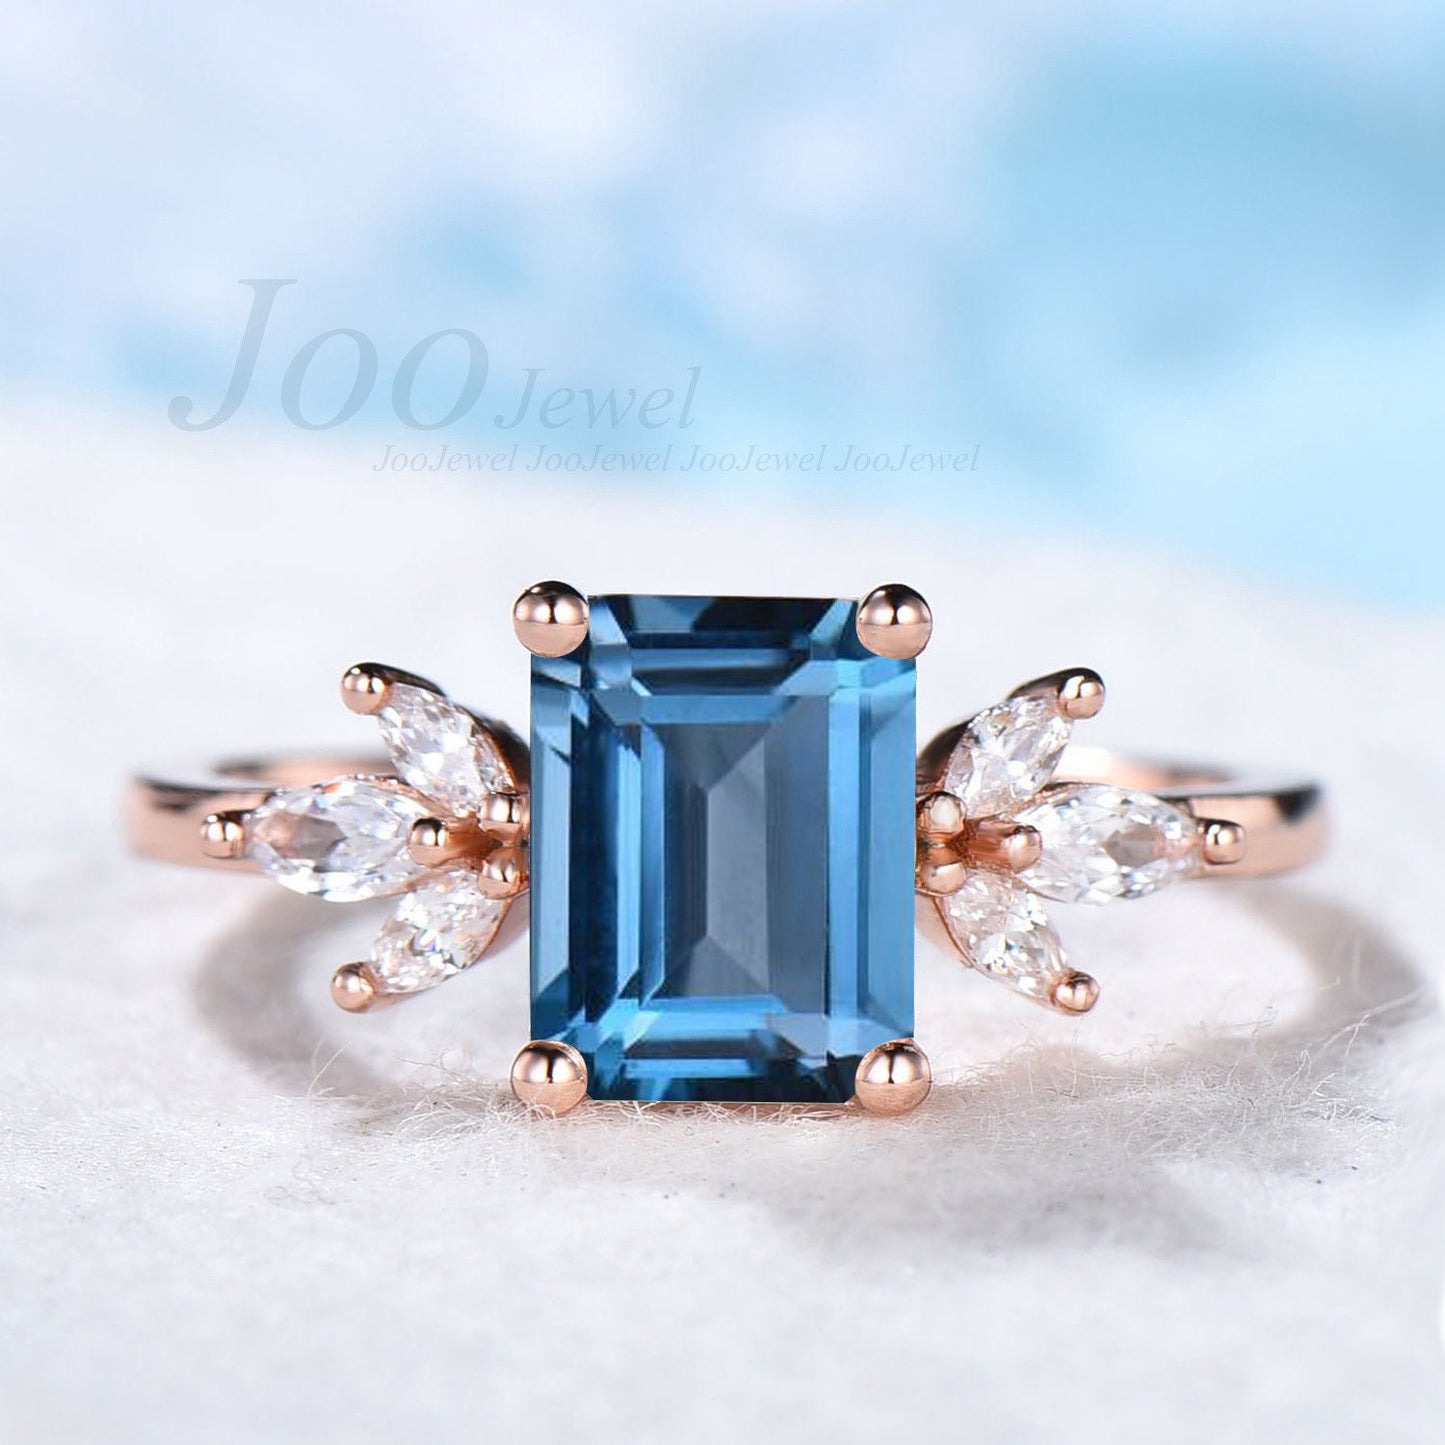 2ct Natural London Blue Topaz Ring Emerald Cut Topaz Engagement Ring Blue Gemstone Ring November Birthstone Jewelry Birthday Gift For Her